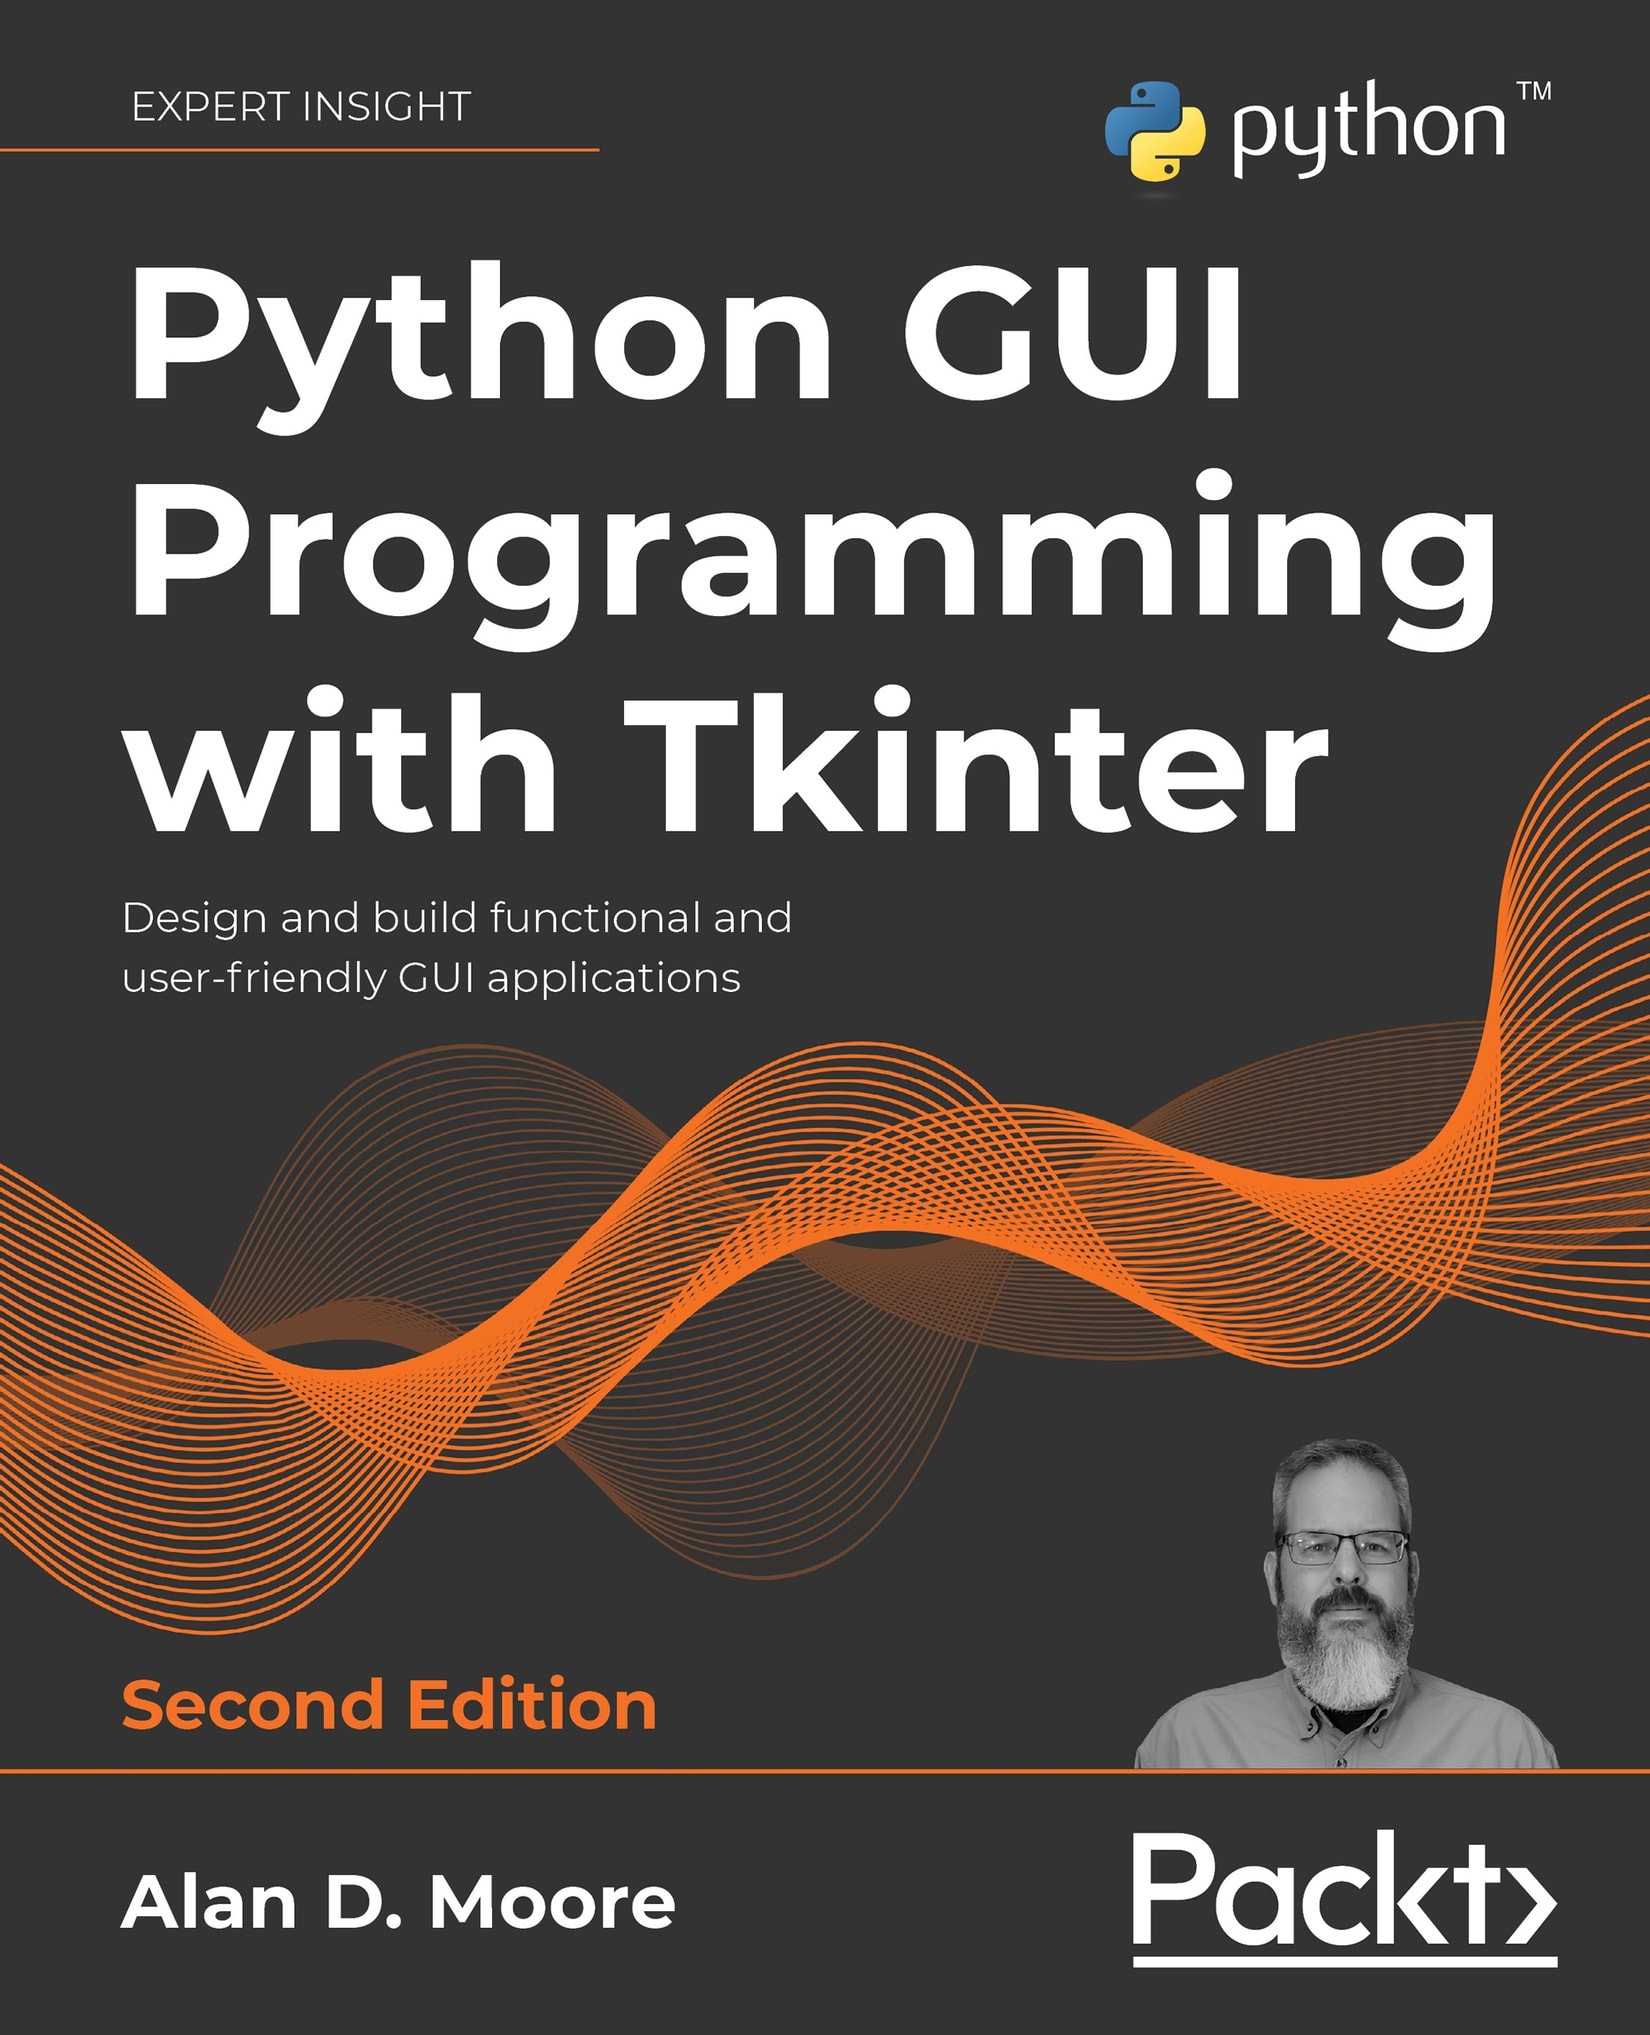 Python GUI Programming With Tkinter: Design and Build Functional and User-Friendly GUI Applications, 2nd Edition